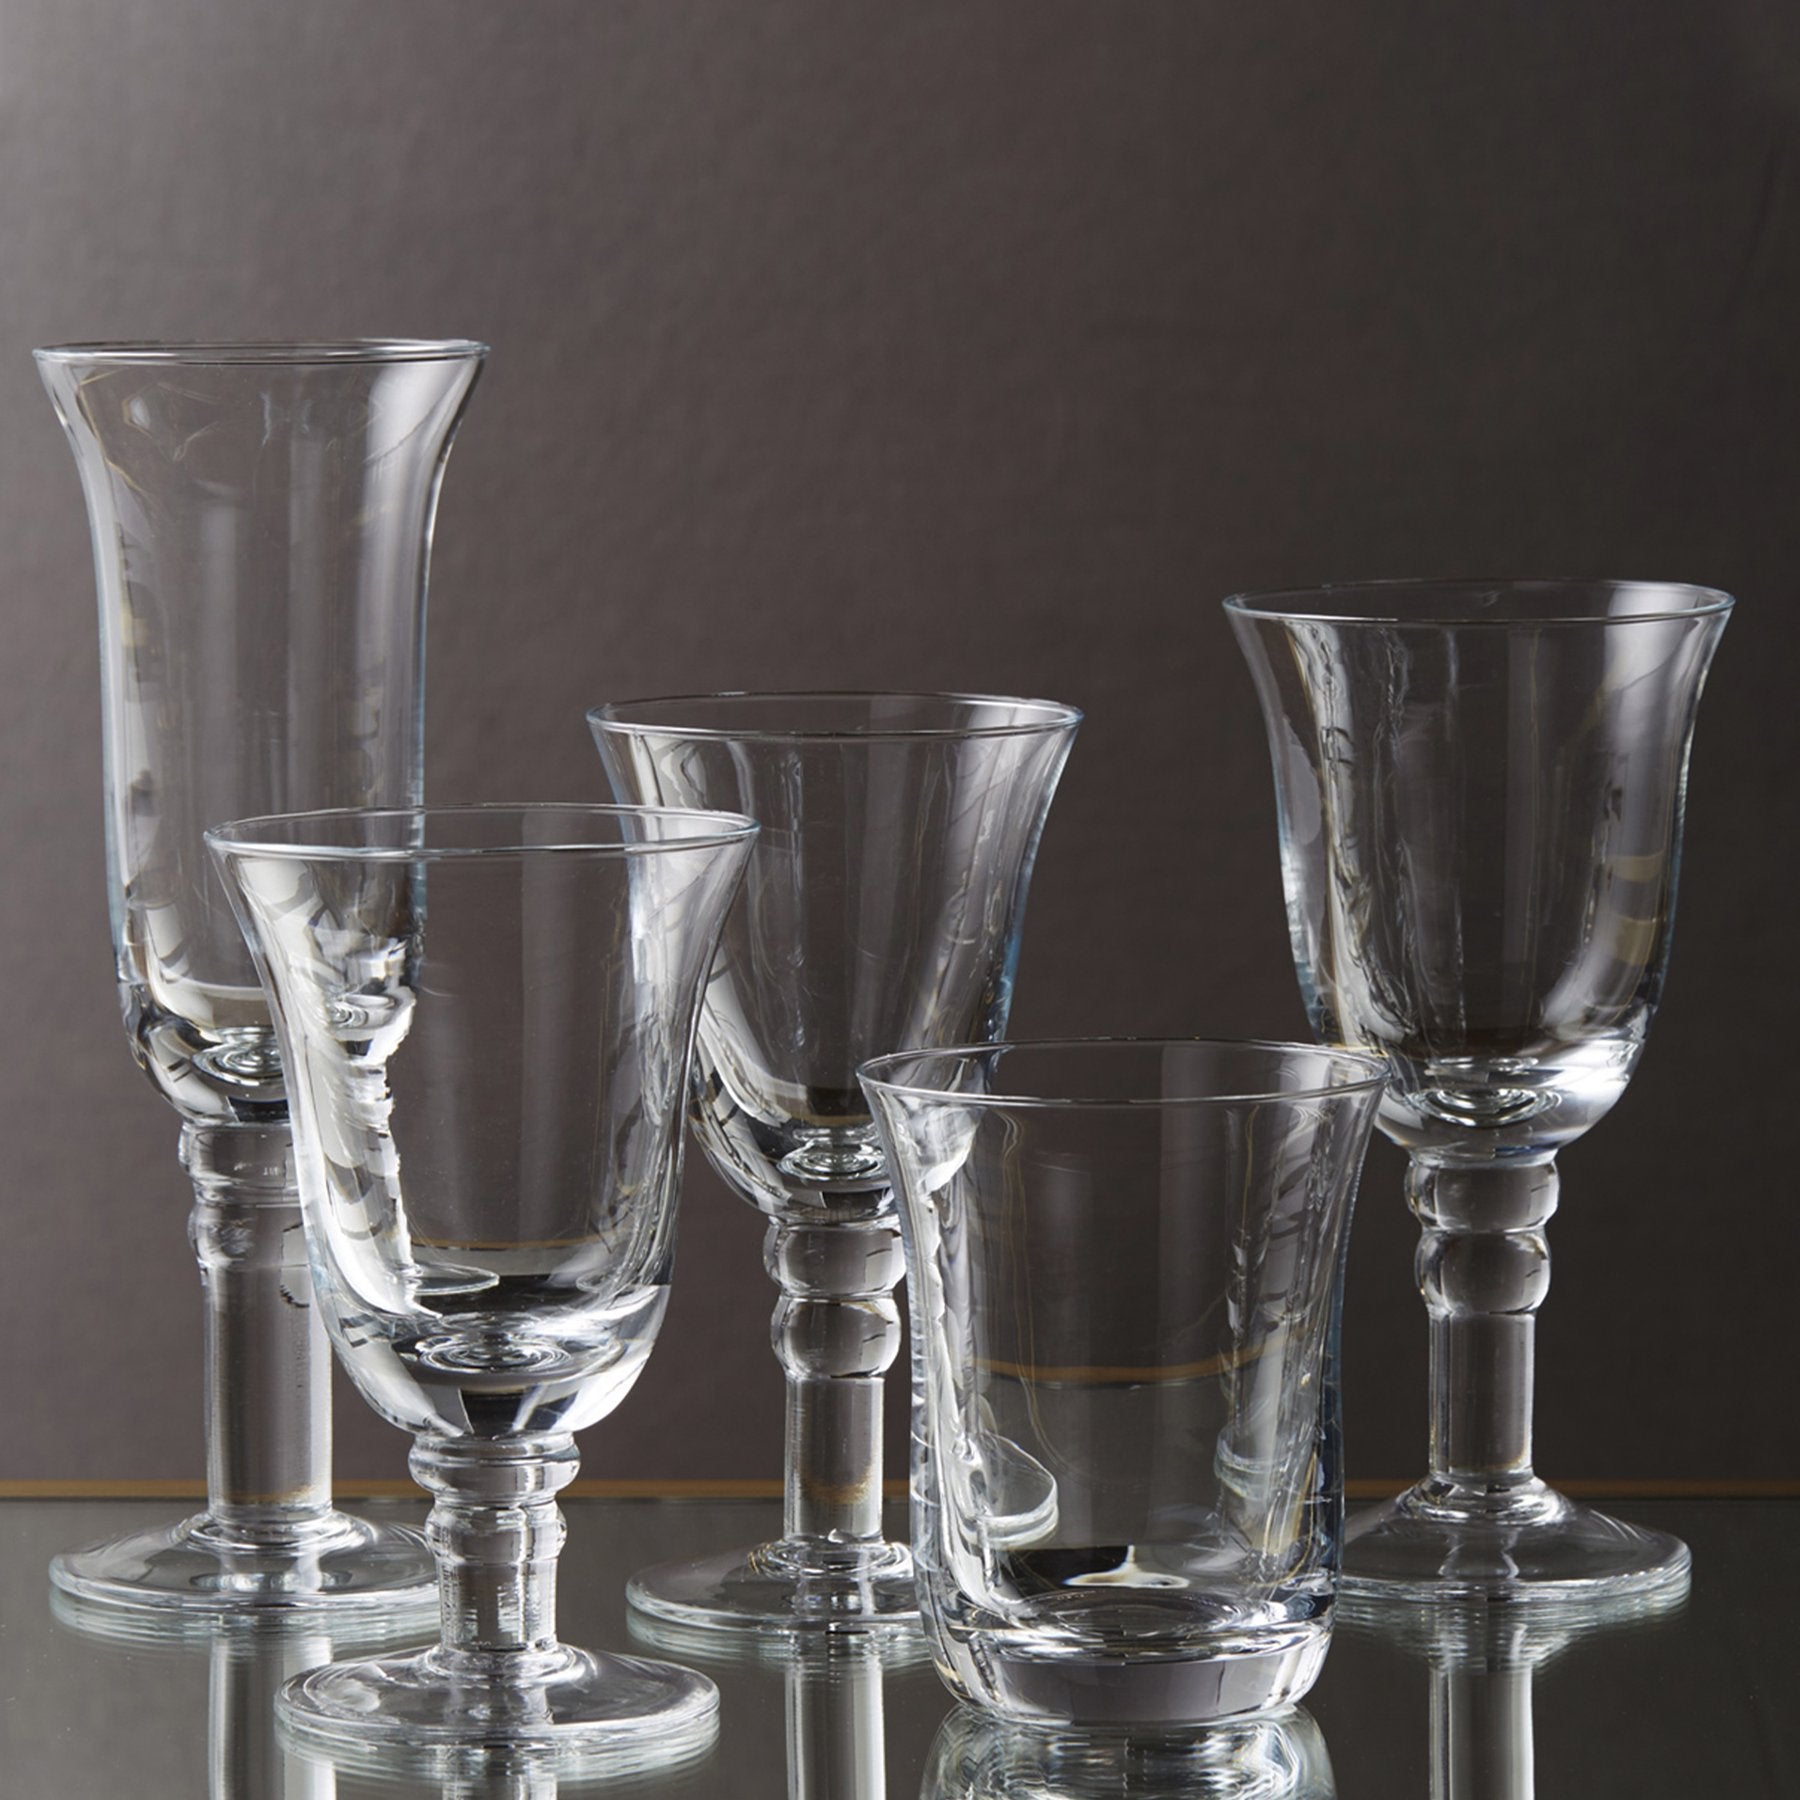 Puccinelli Classic Water Glass